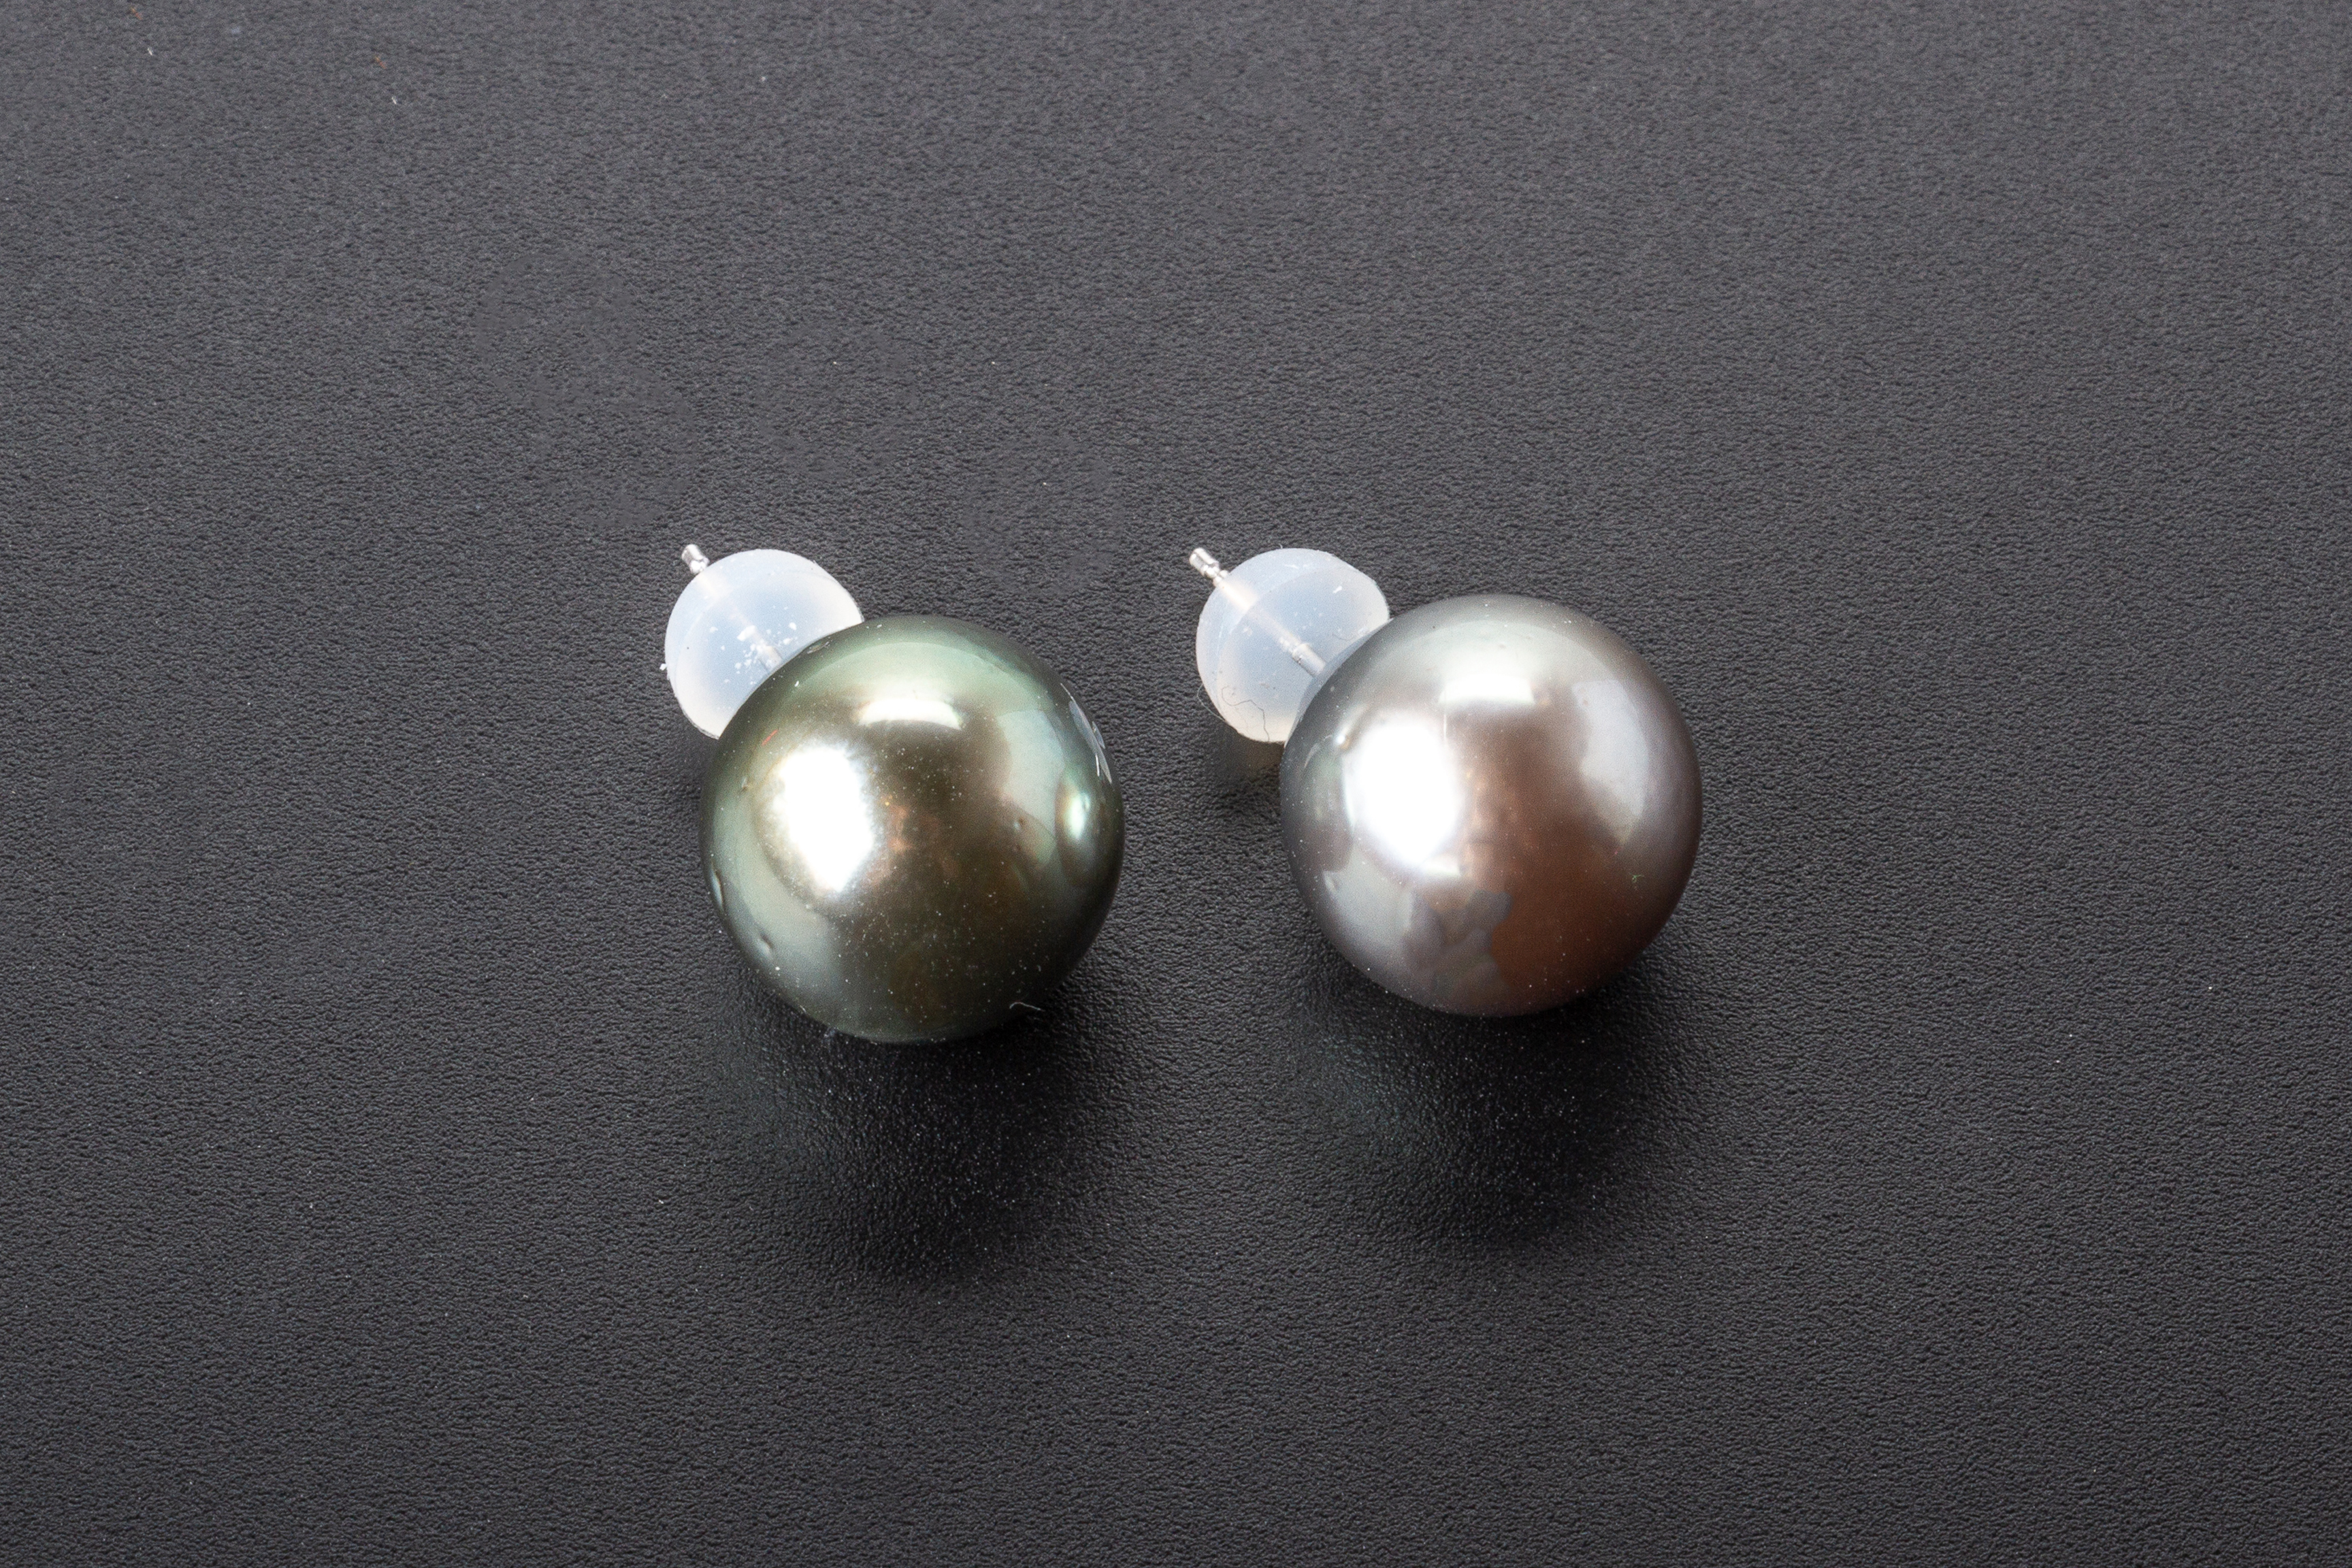 A PAIR OF GREY CULTURED PEARL EARRINGS - Image 2 of 3